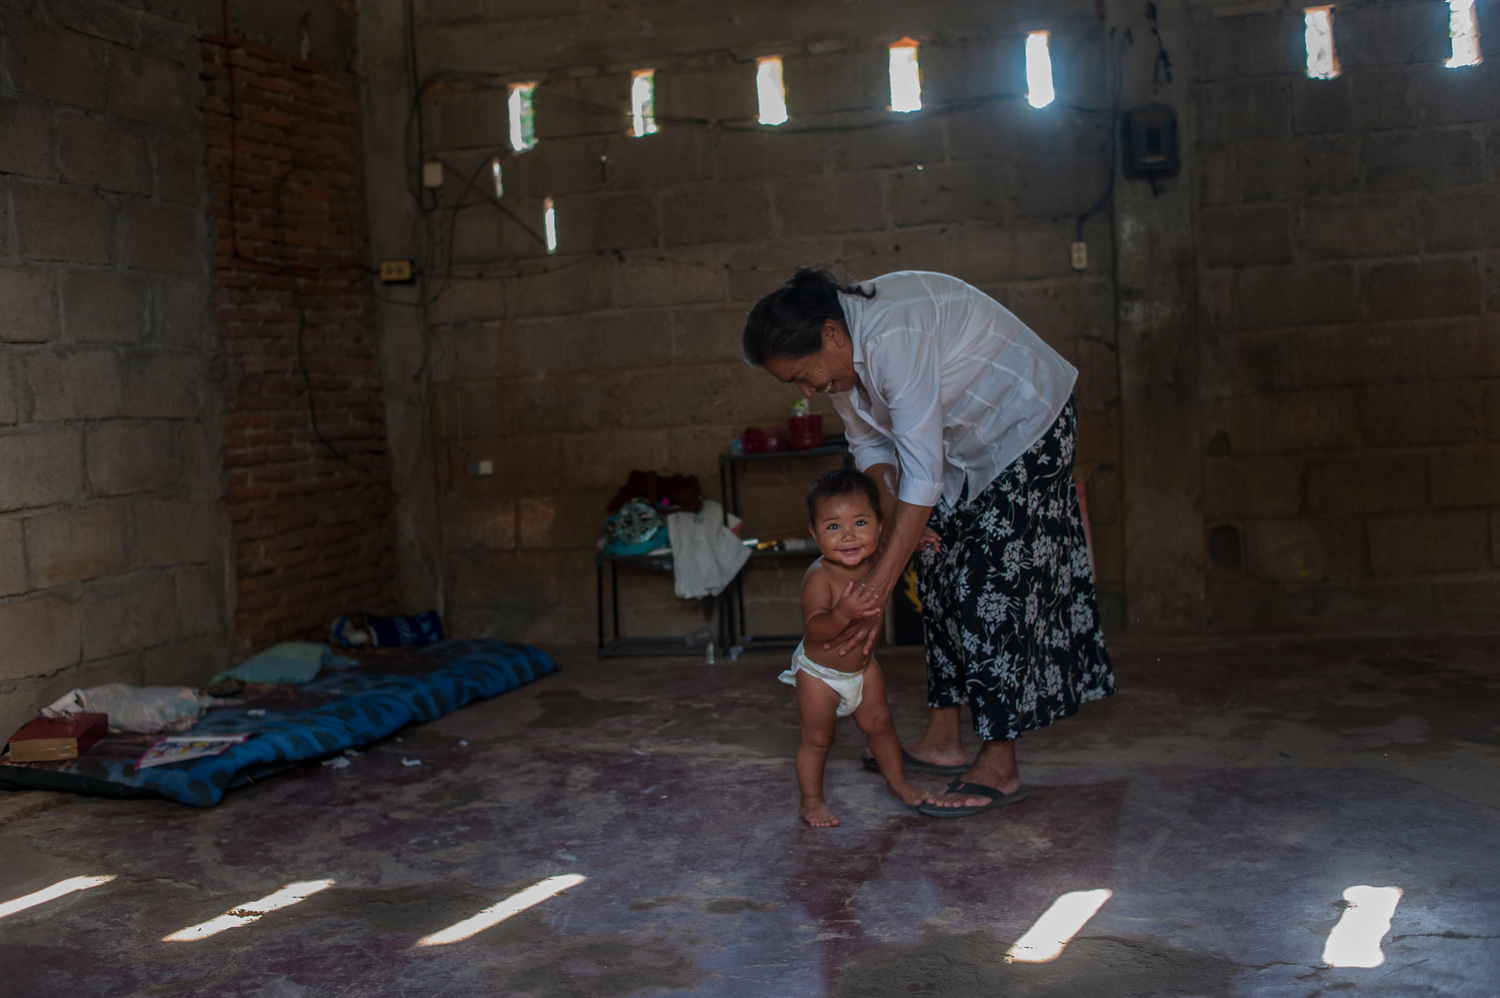 Elder woman escaped from violence of El Salvador, feels happy in her new life in Chiapas, Mexico.